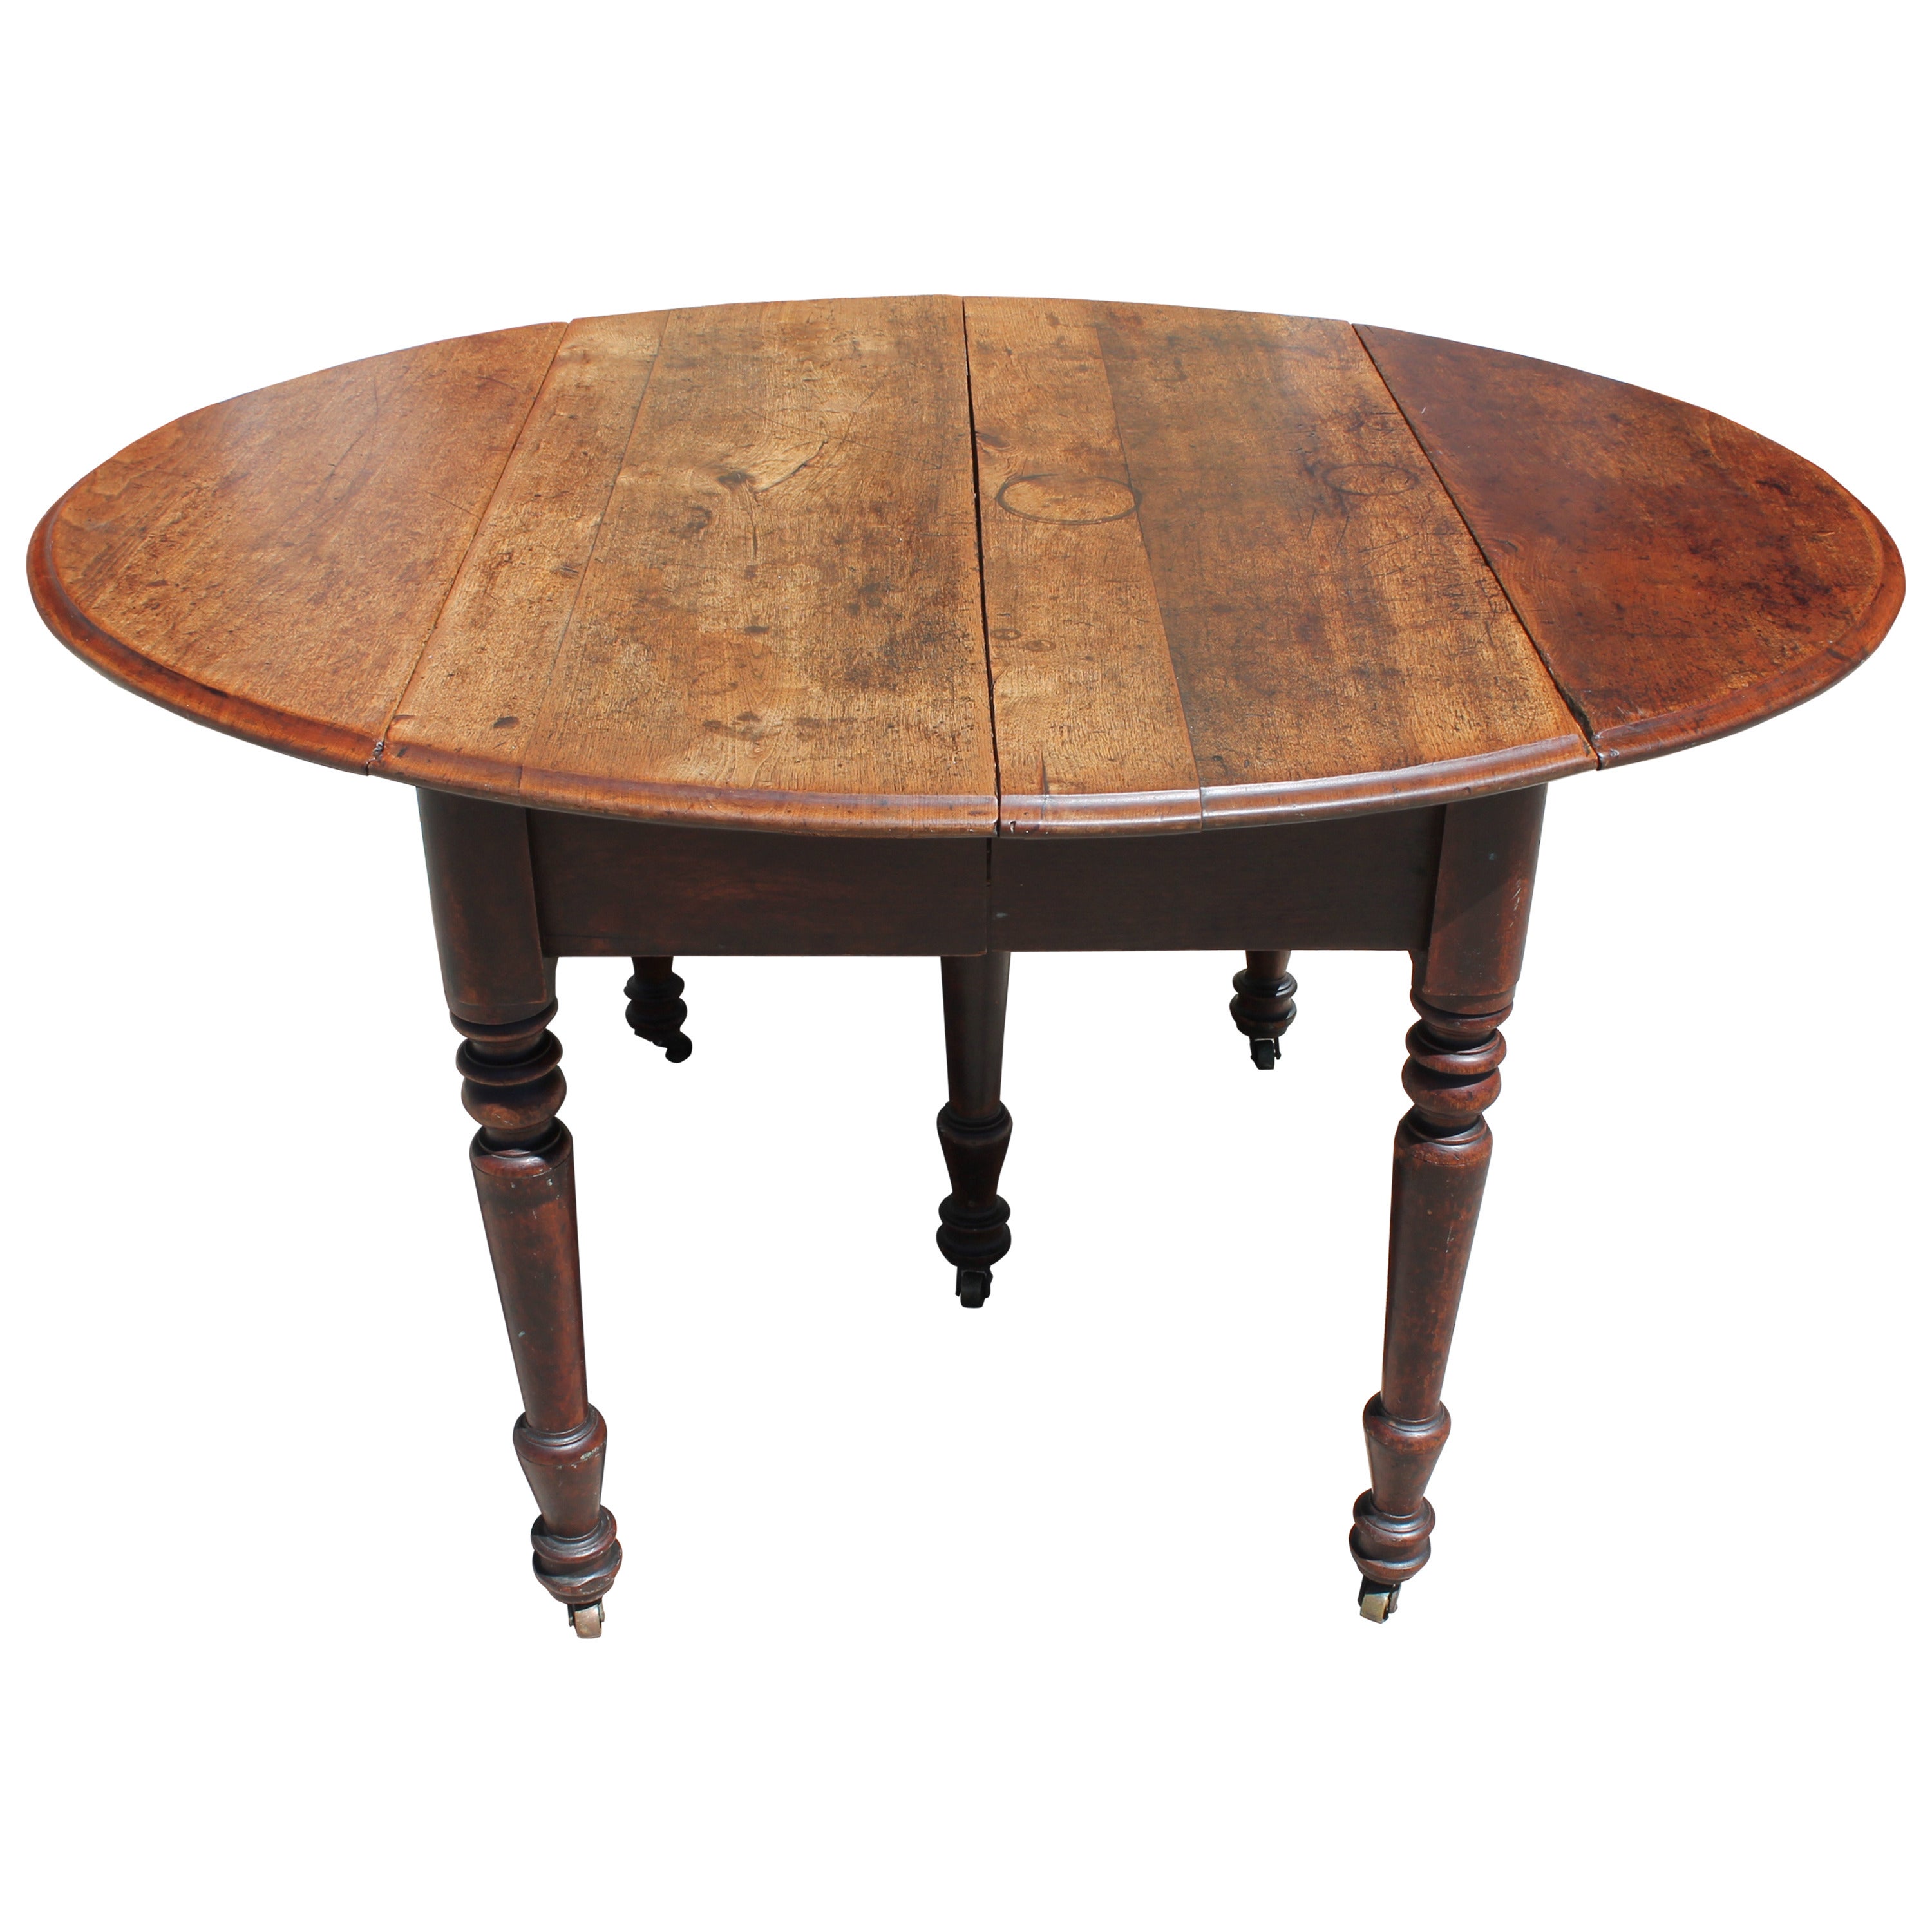 Early 19th Century Round Rustic Drop-Leaf Table